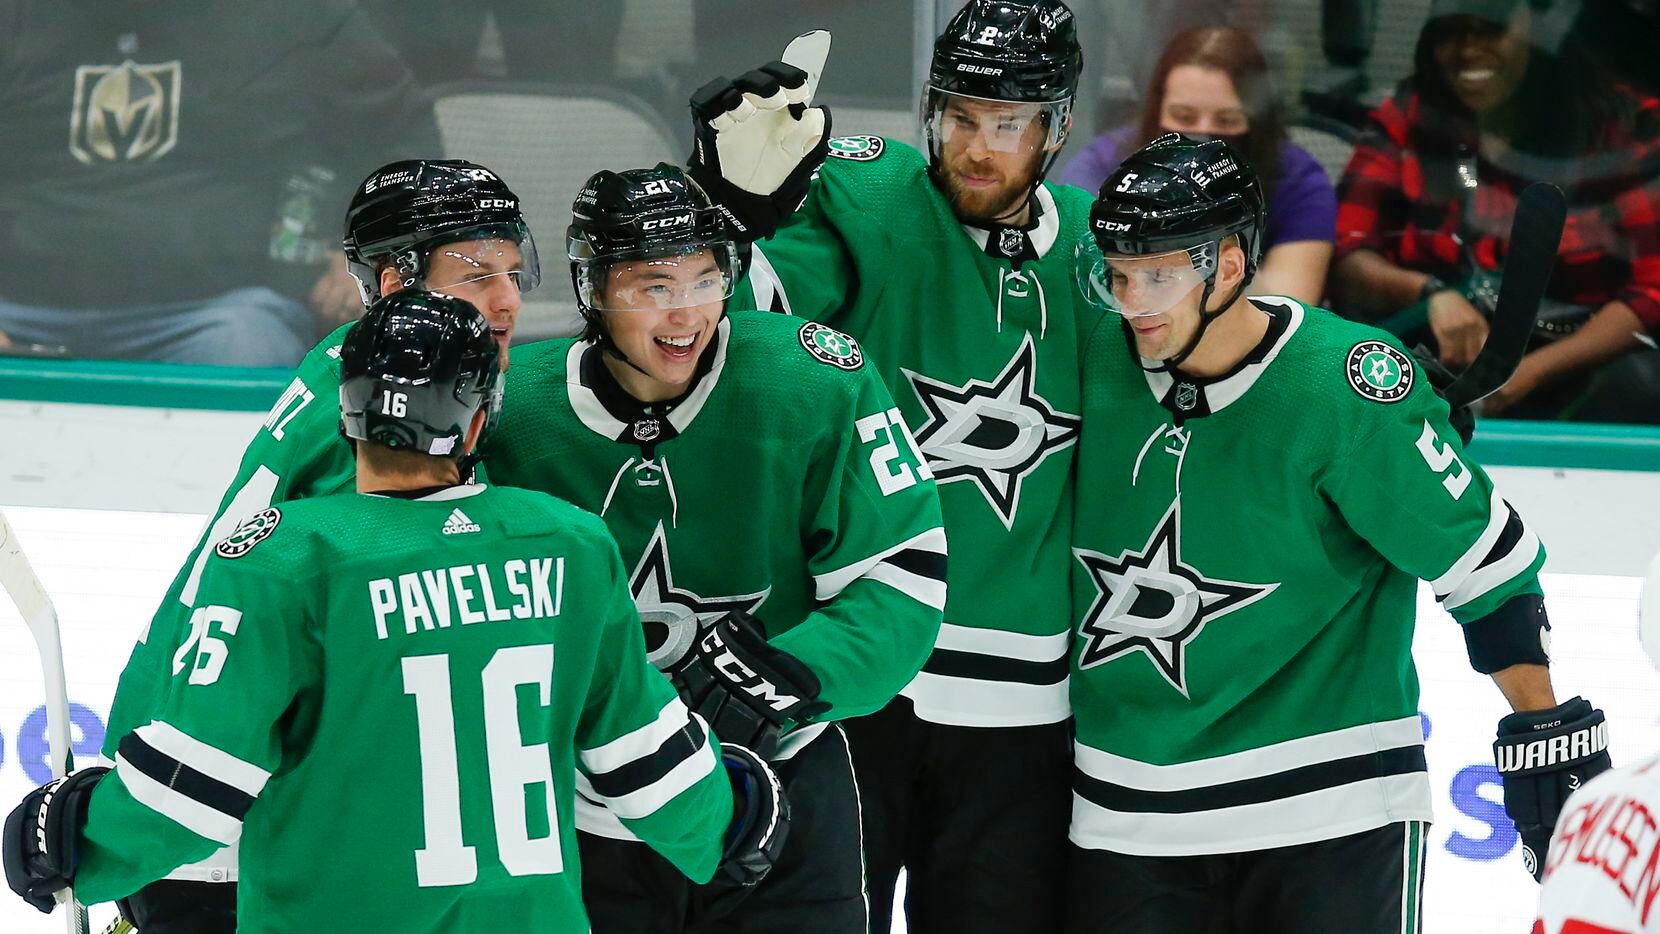 Dallas Stars forward Jason Robertson, third from left, is congratulated by teammates after scoring a goal during the third period of an NHL hockey game against the Detroit Red Wings, Tuesday, November 16, 2021. Dallas won 5-2.